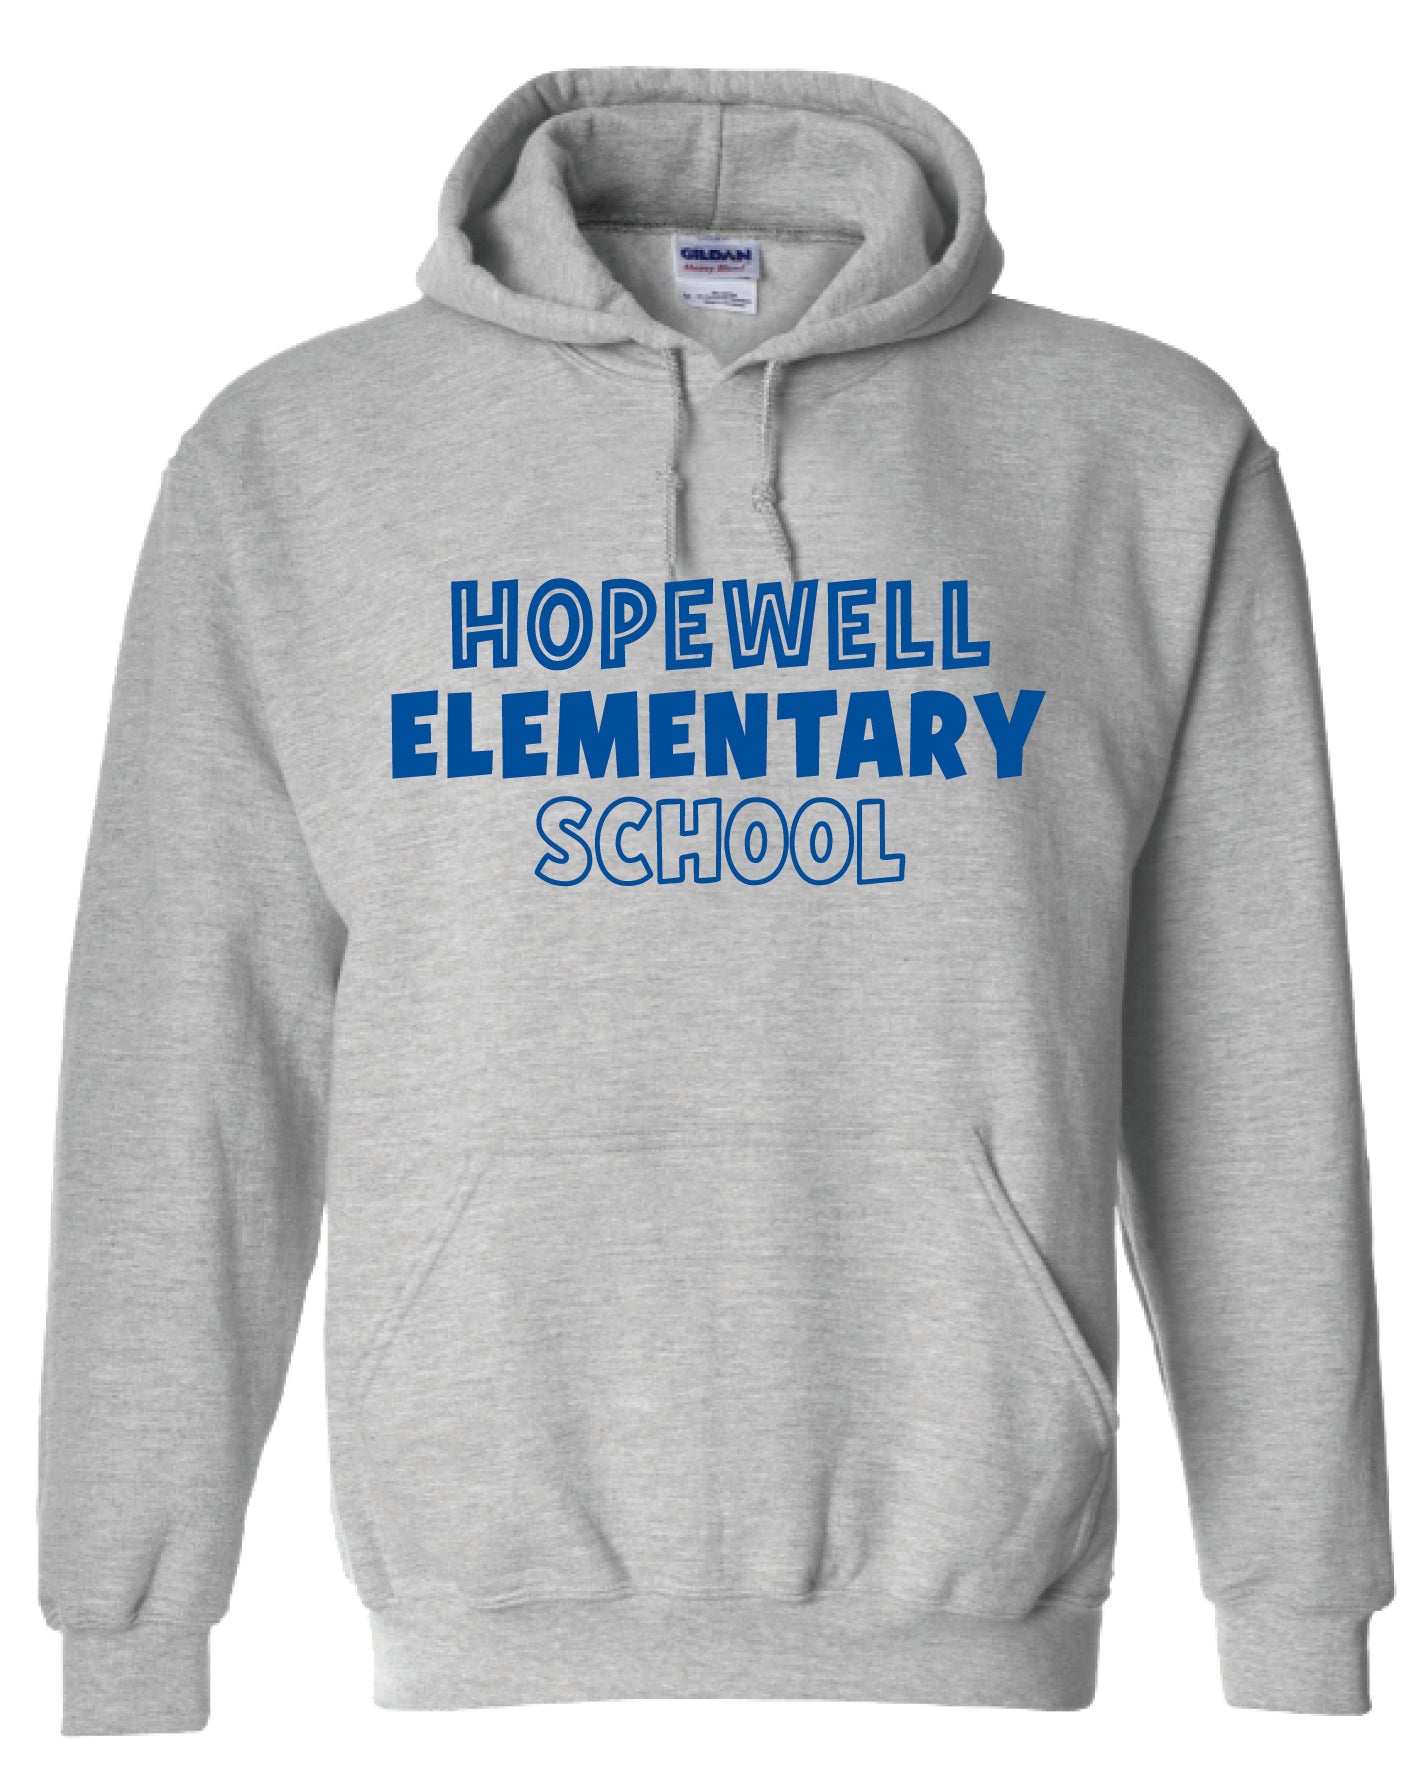 Hopewell Gray Hoodie - Adult and Youth